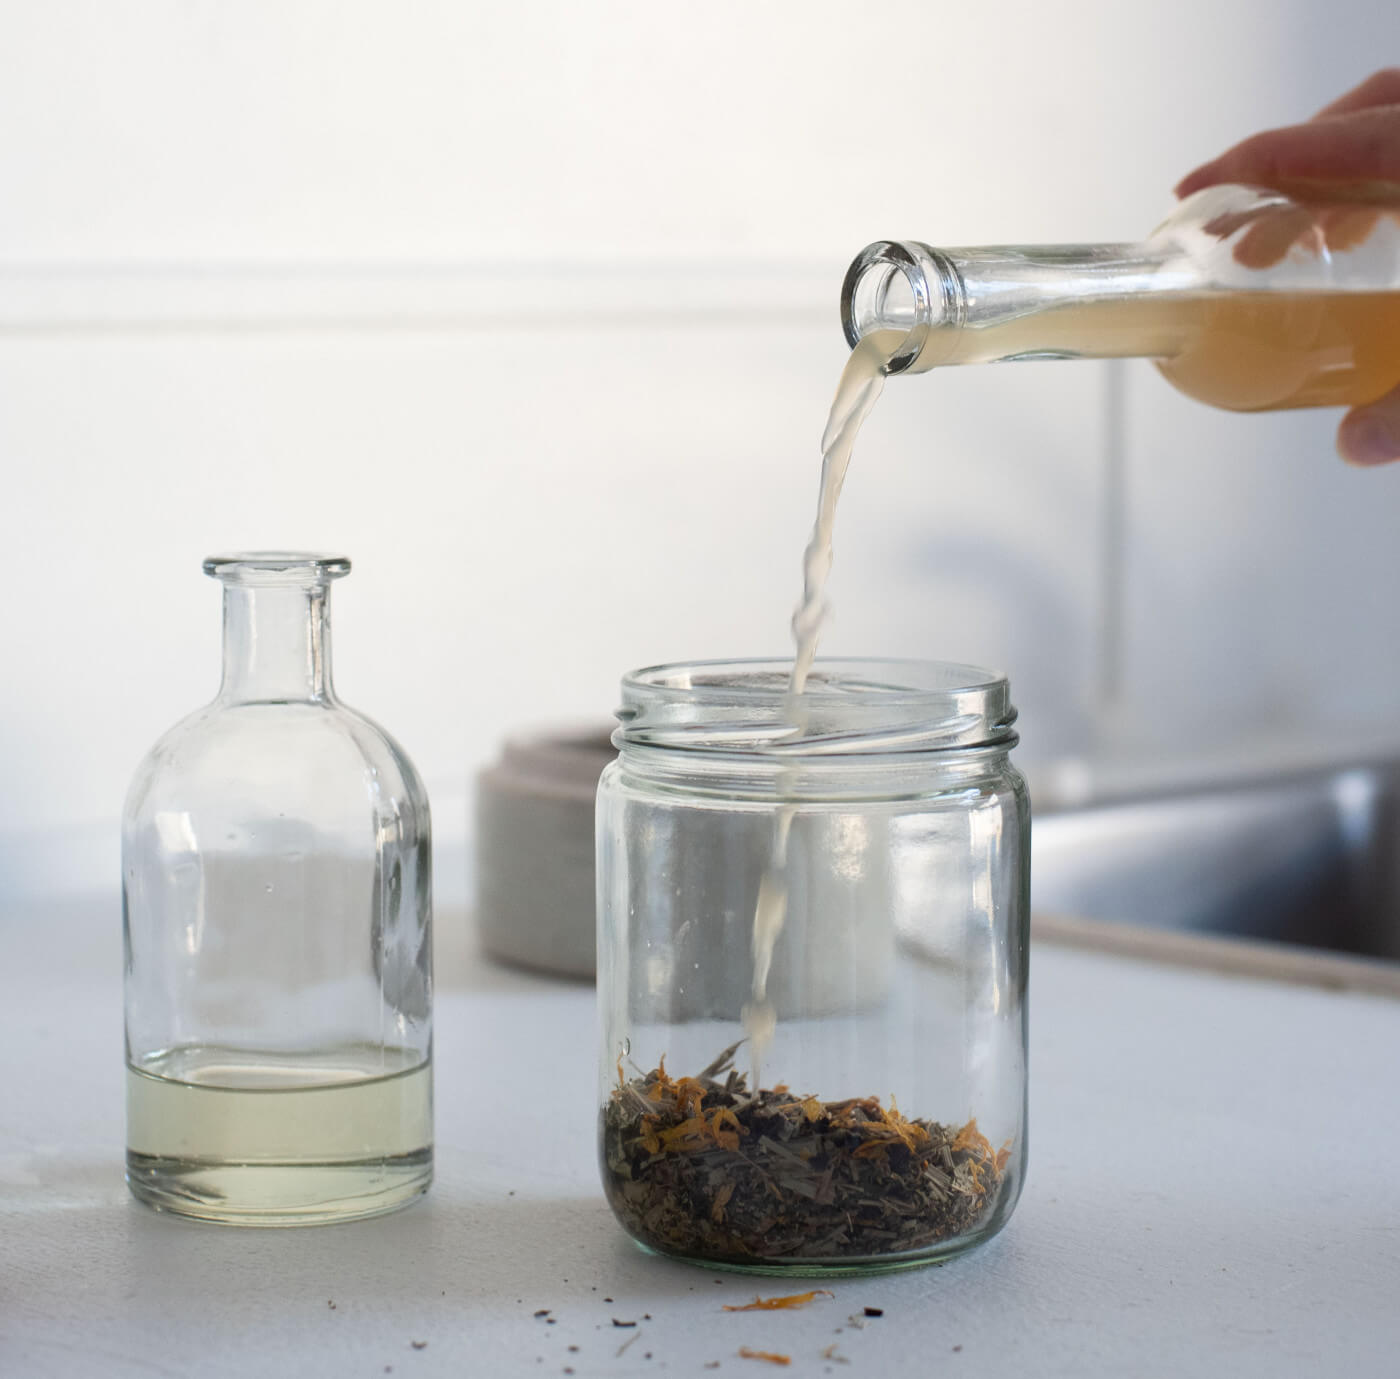 How To Make An Oxymel: Herb infused vinegar and honey